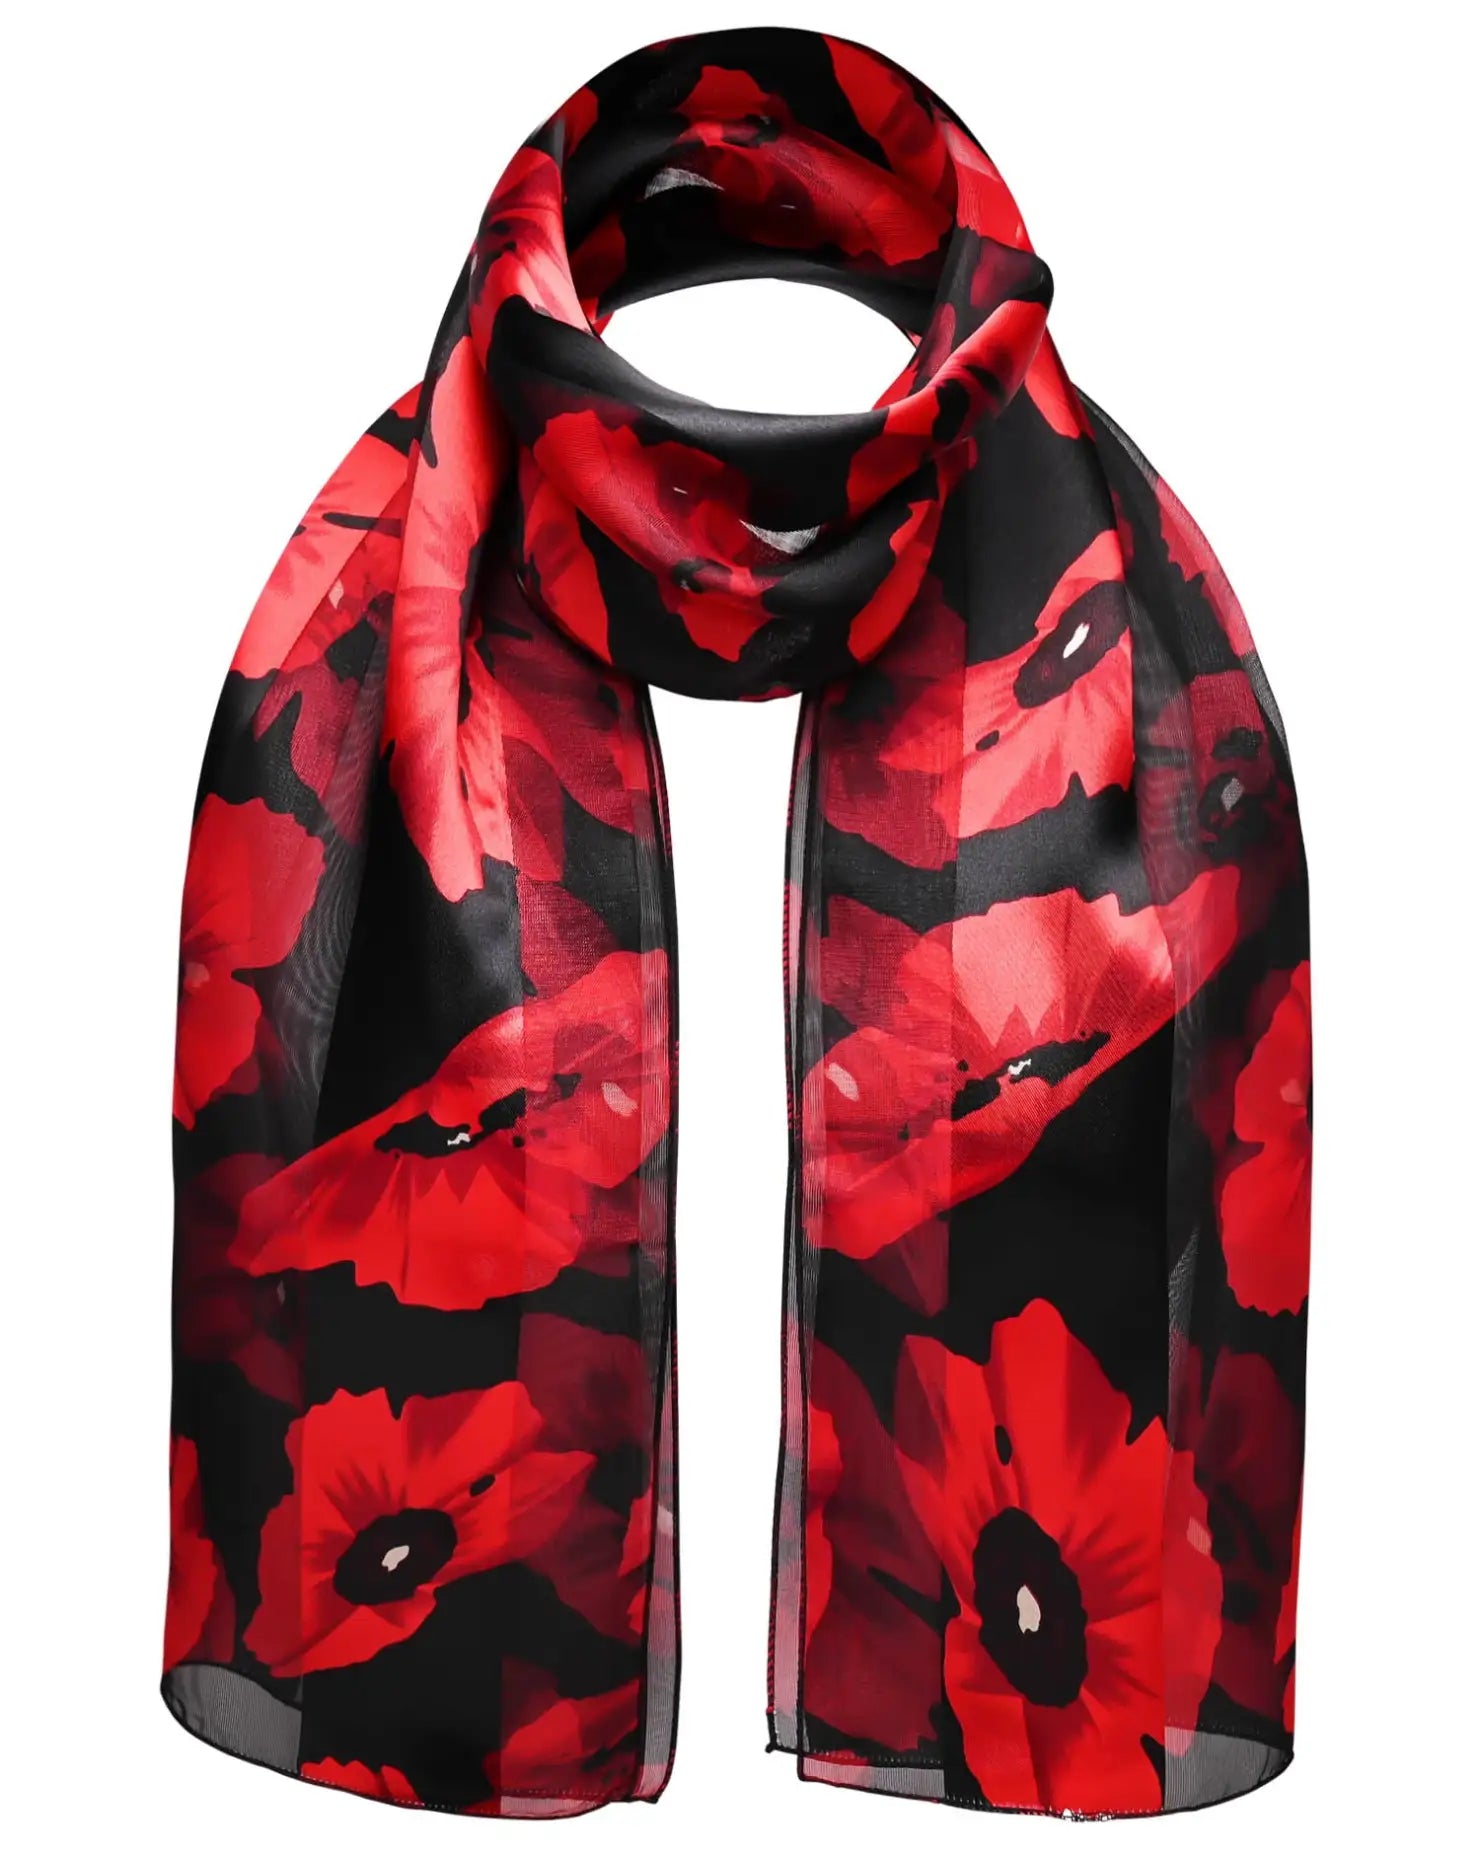 Poppy Floral Print Scarf displayed in the ’Poppy Floral Print Scarf & Gold Plated Ring Set’